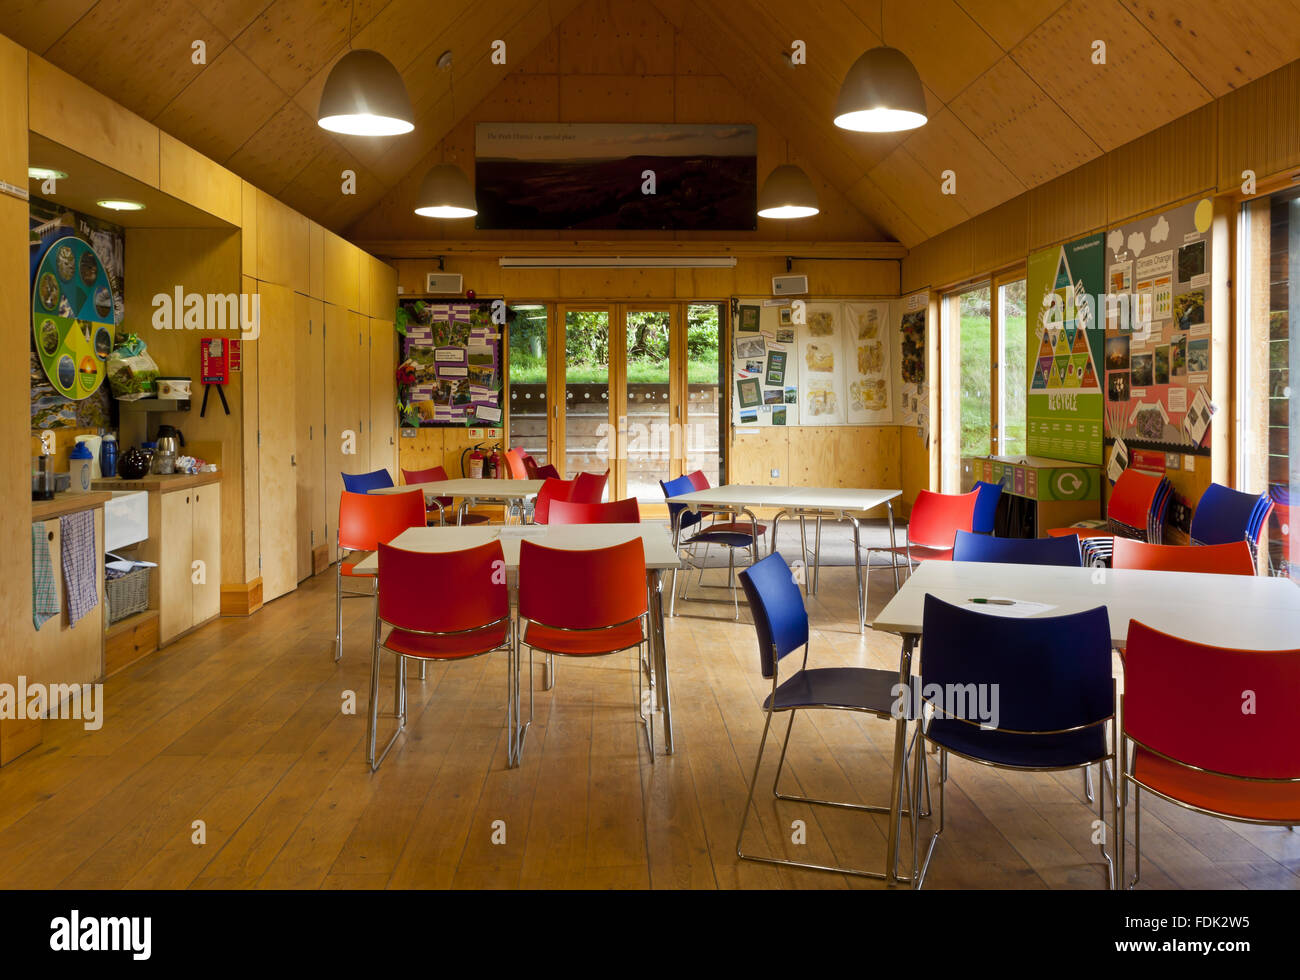 Interior of Moorland Discovery Centre on the Longshaw Estate, Derbyshire. The Moorland Discovery Centre is used for educational visits by schools and community groups. Stock Photo